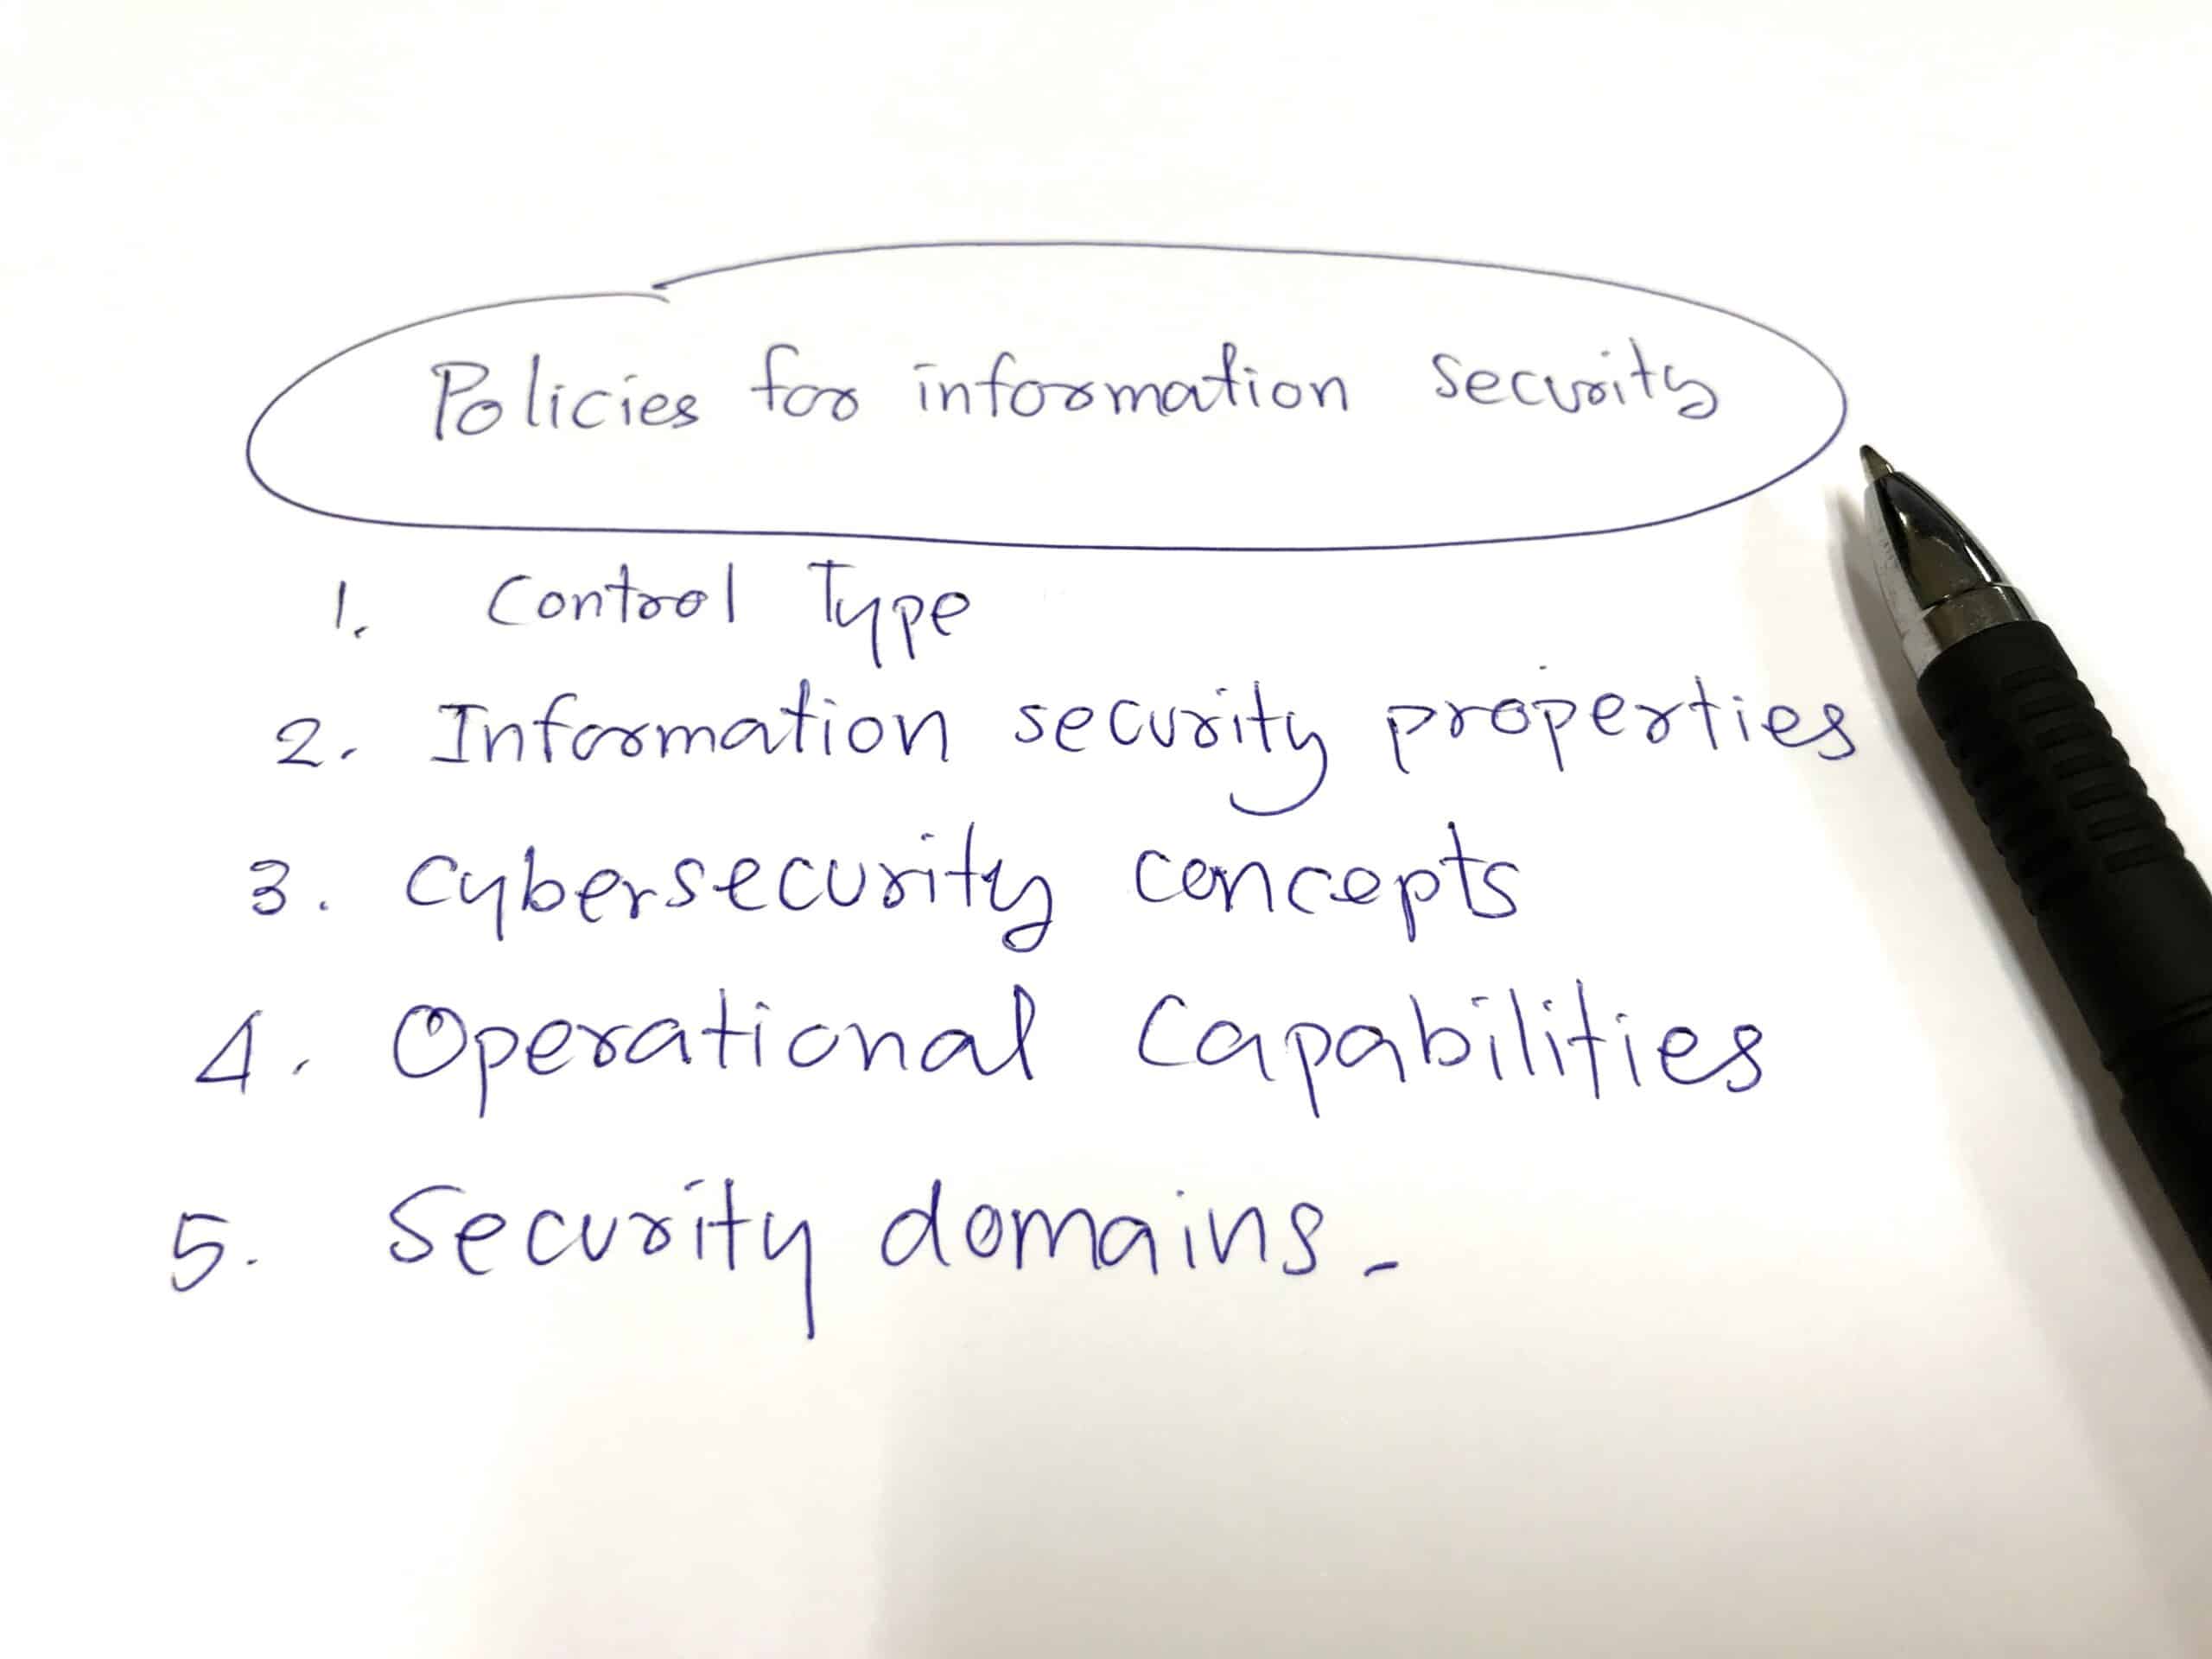 A handwritten checklist of aspects of cybersecurity.